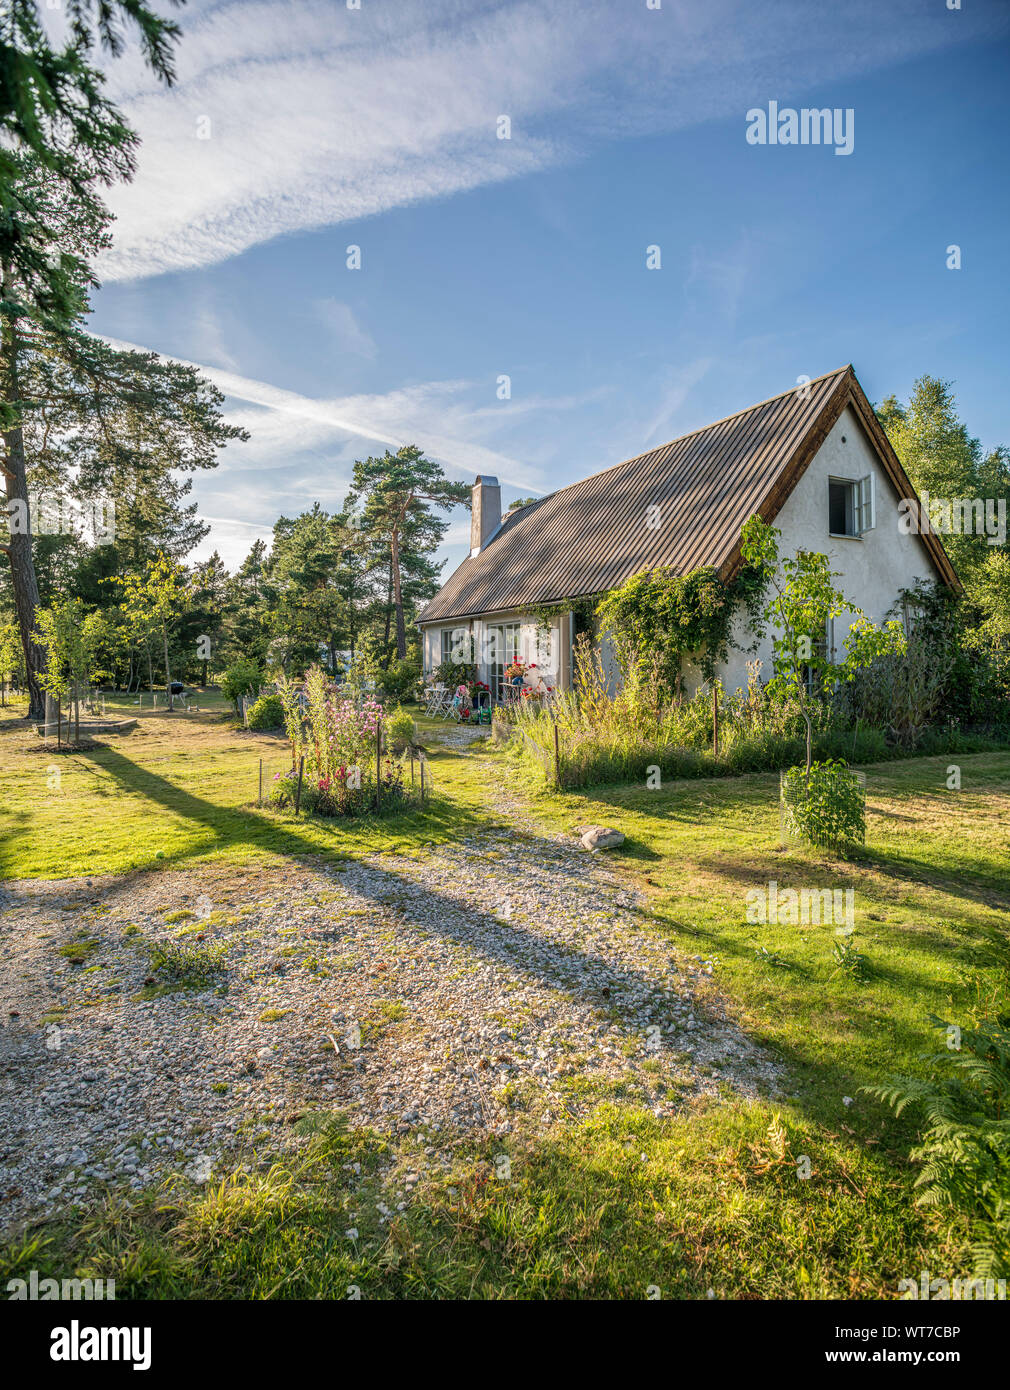 Small cottage and a beautiful garden in a rural landscape. Gotland, Sweden, Scandinavia. Stock Photo